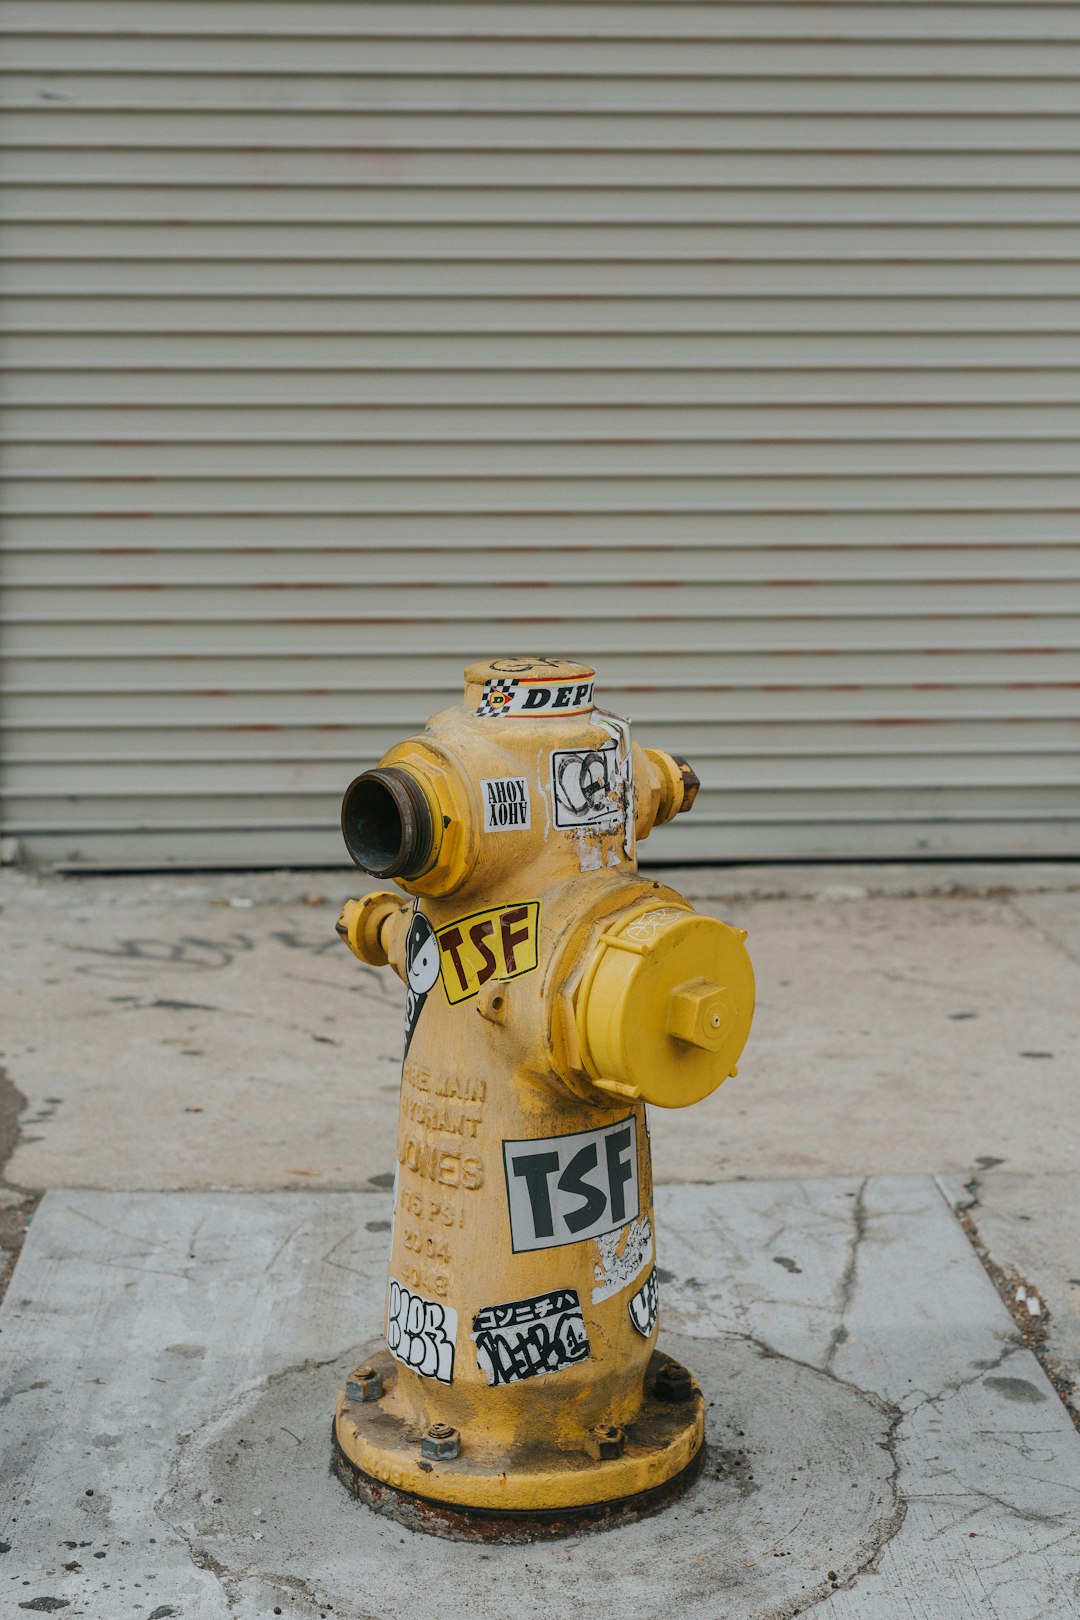 yellow and white fire hydrant